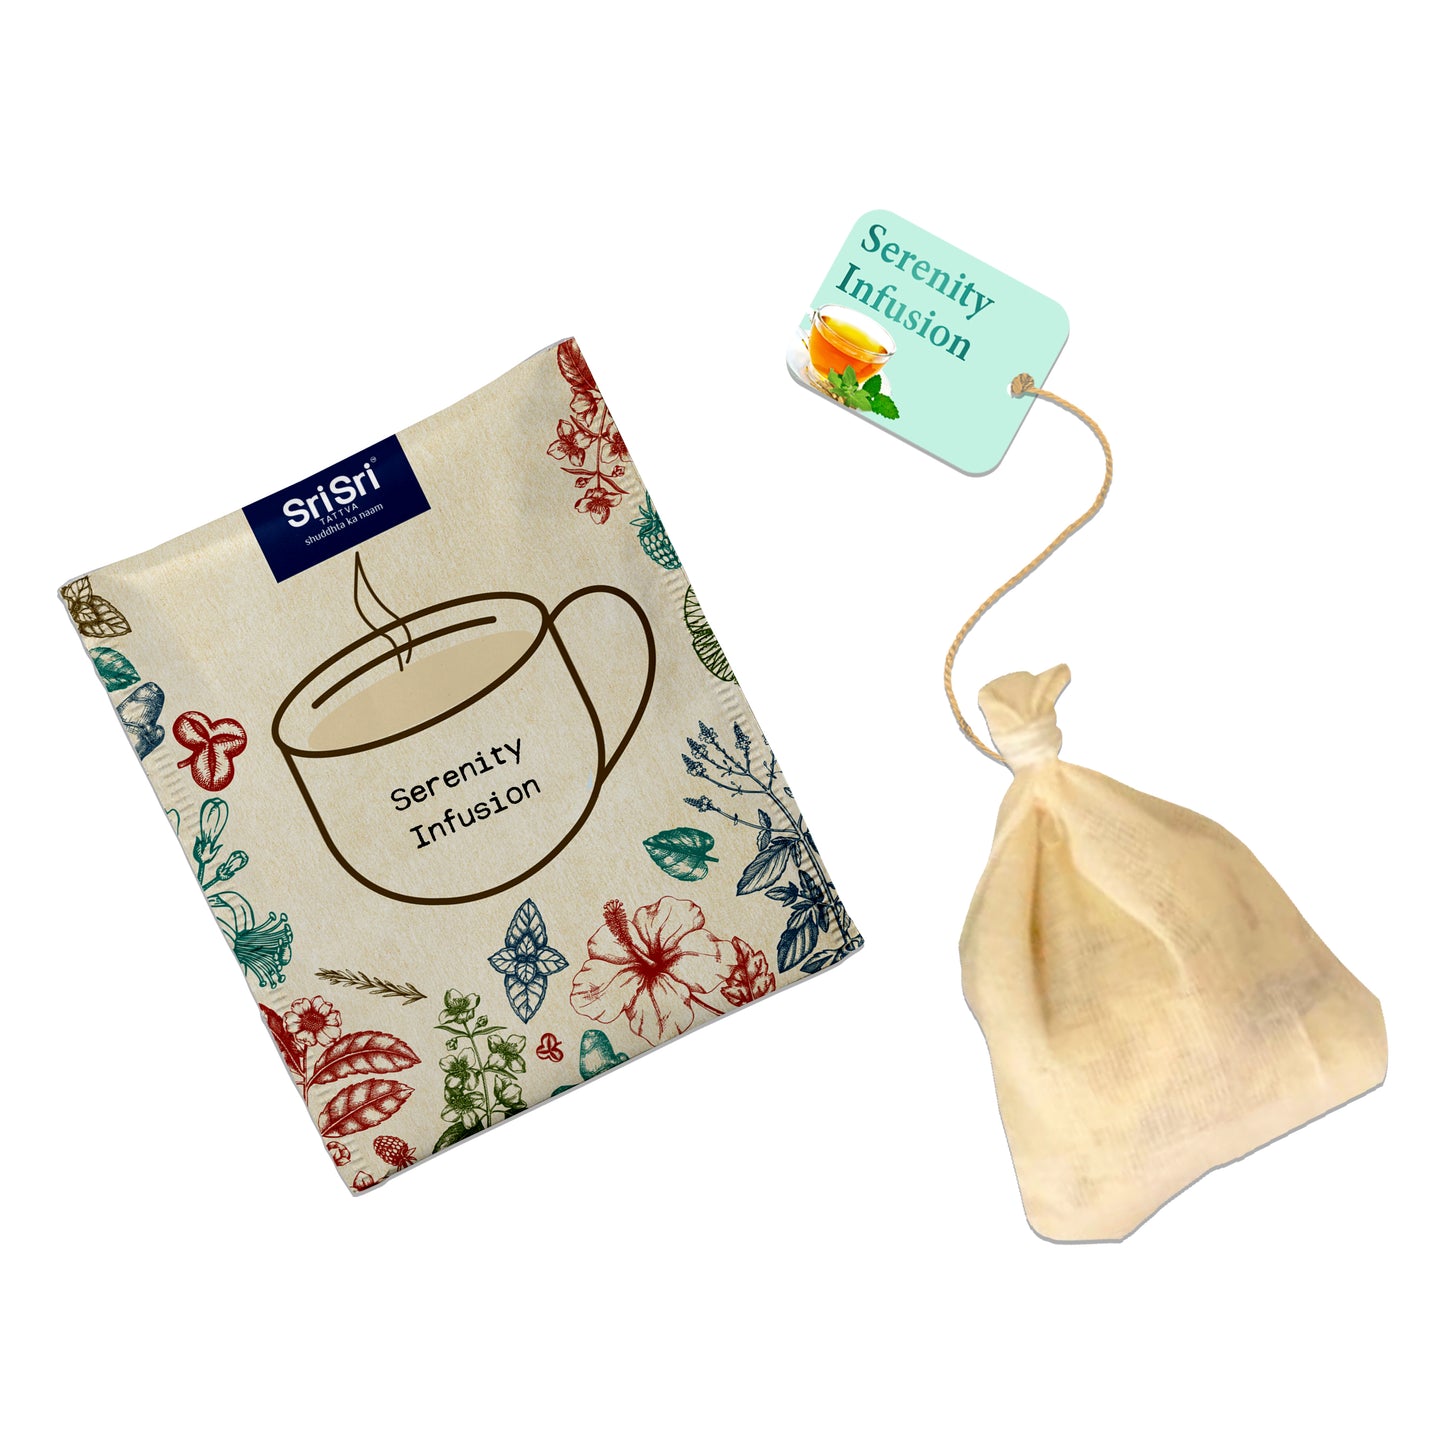 Serenity Infusion - FOR STAYING CALM - A truly calming daily cup, when you need it most - 20 Dip Bags